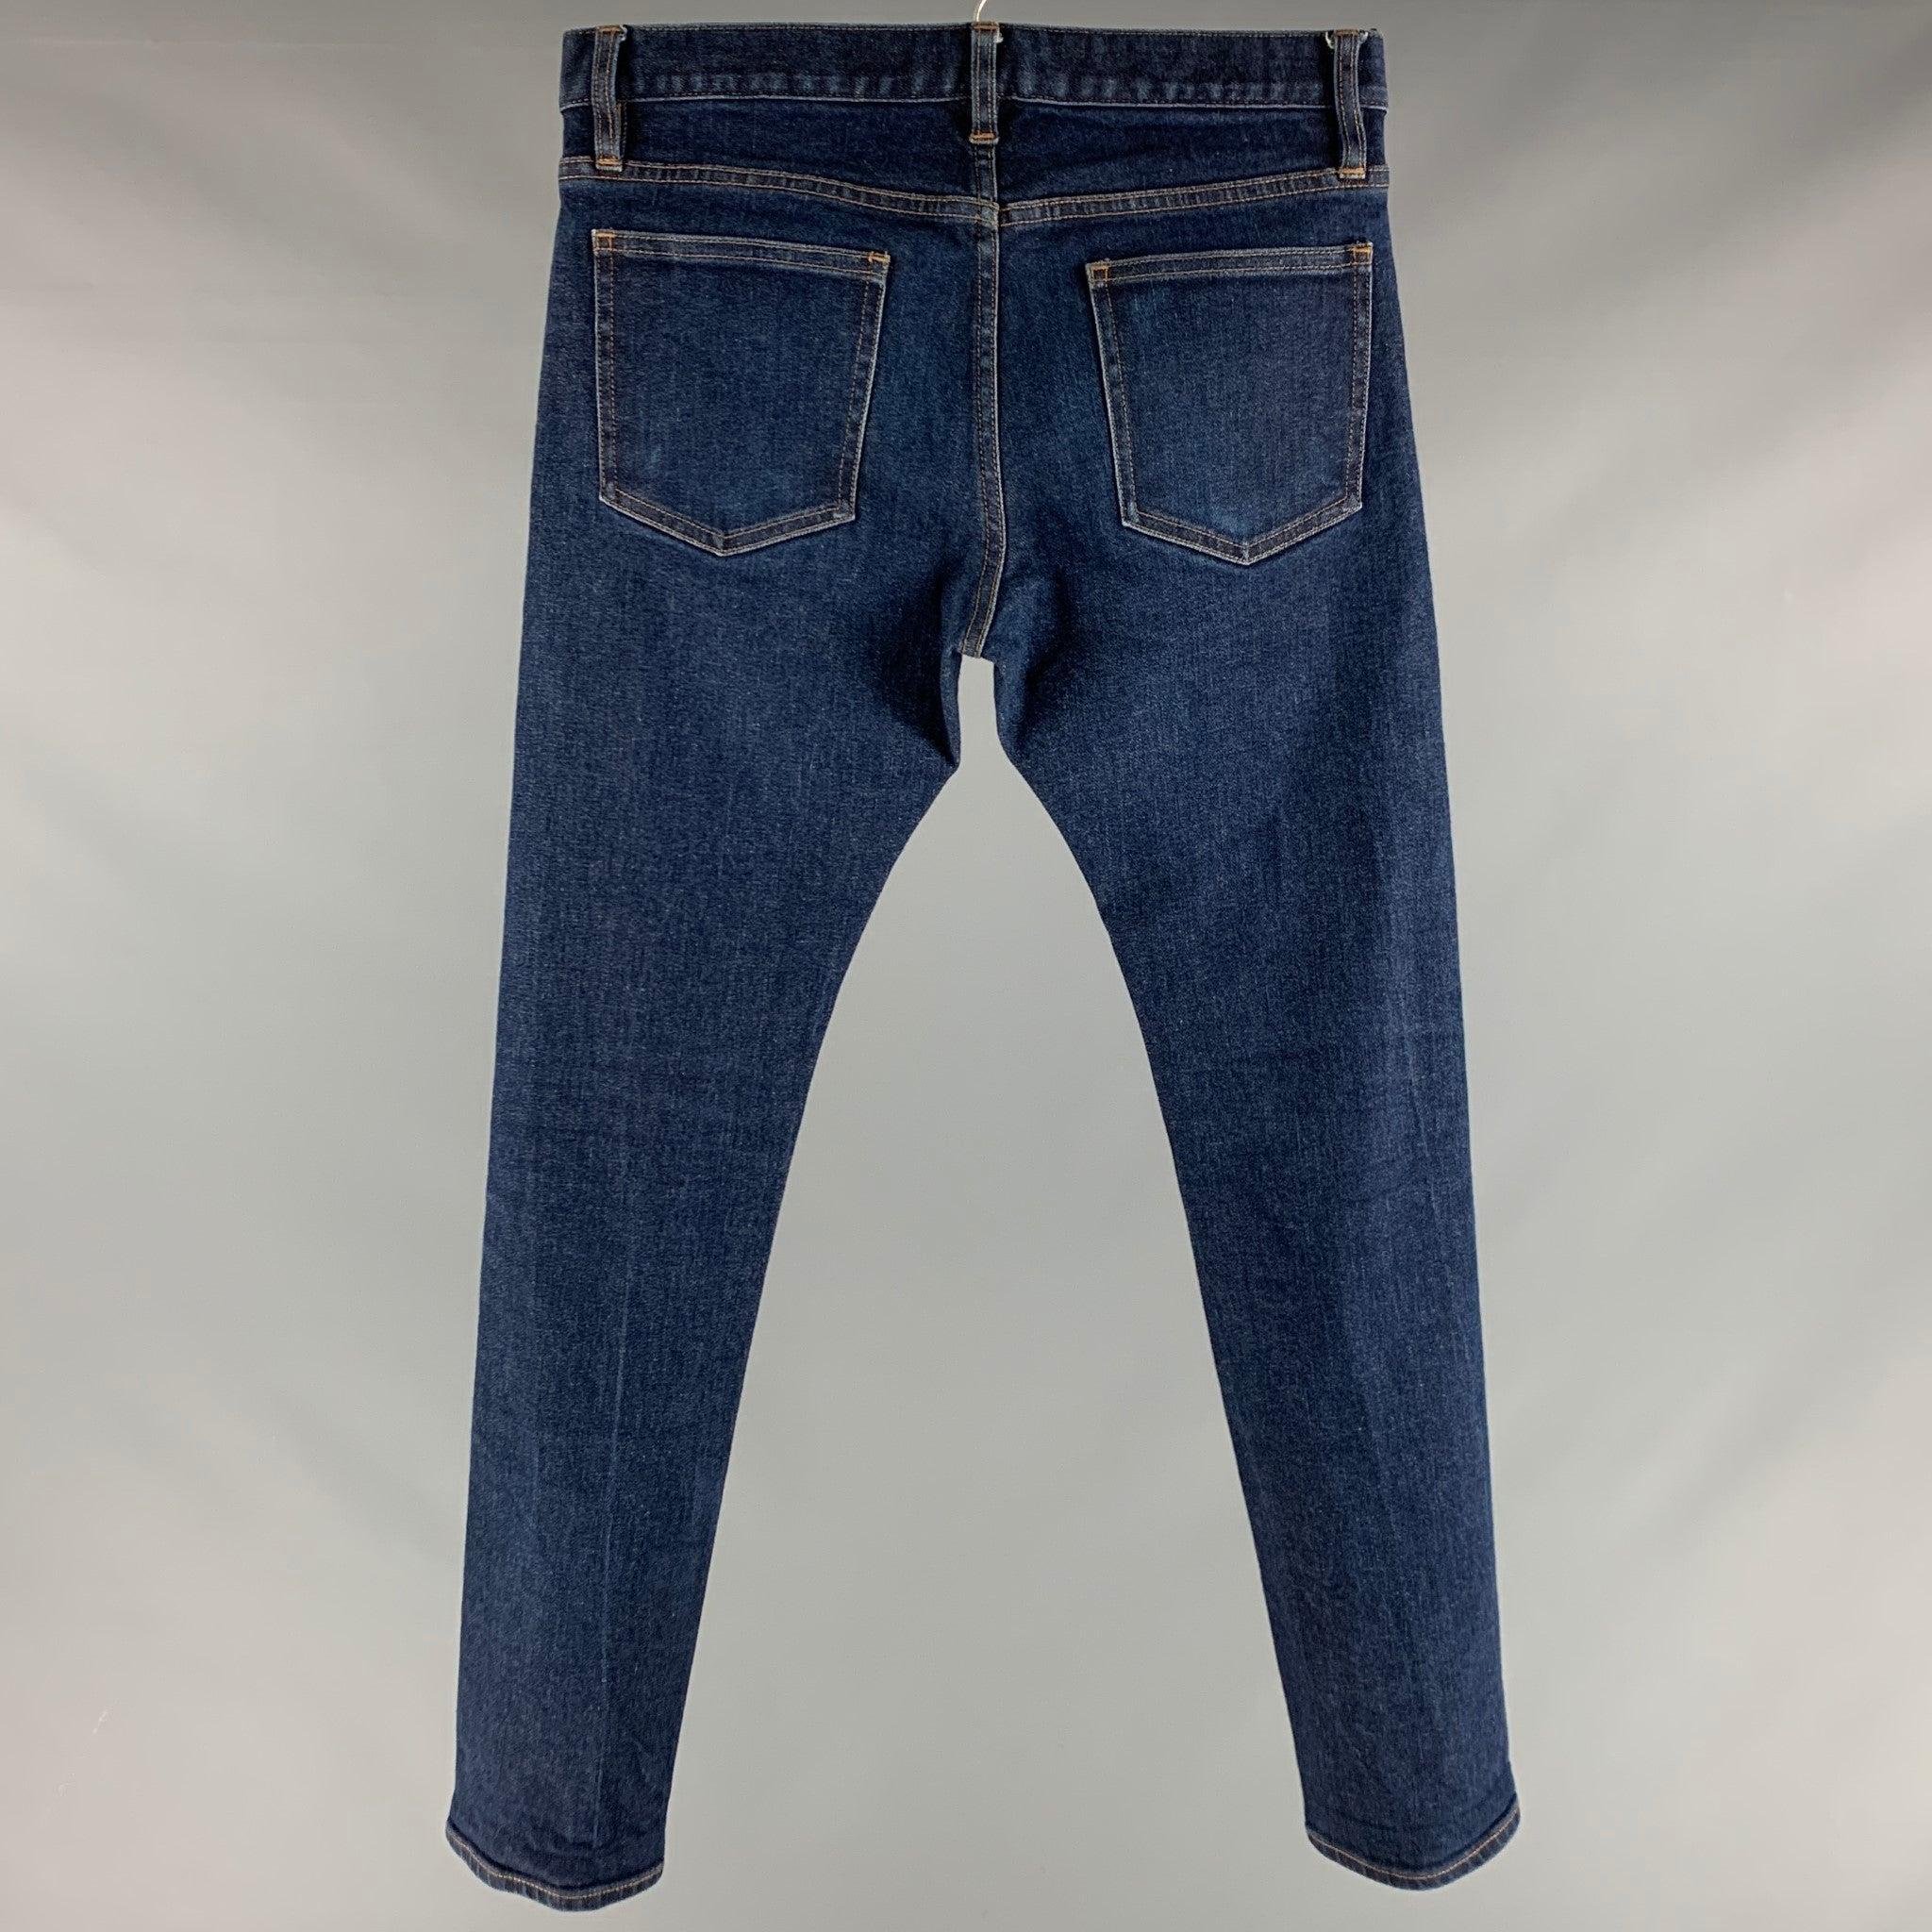 JOHN VARVATOS jeans
in a blue cotton blend fabric featuring five pockets style, and zip fly closure.New With Tags. 

Marked:   30RG 

Measurements: 
  Waist: 30 inches Rise: 7.5 inches Inseam: 31 inches 
  
  
 
Reference: 127589
Category: